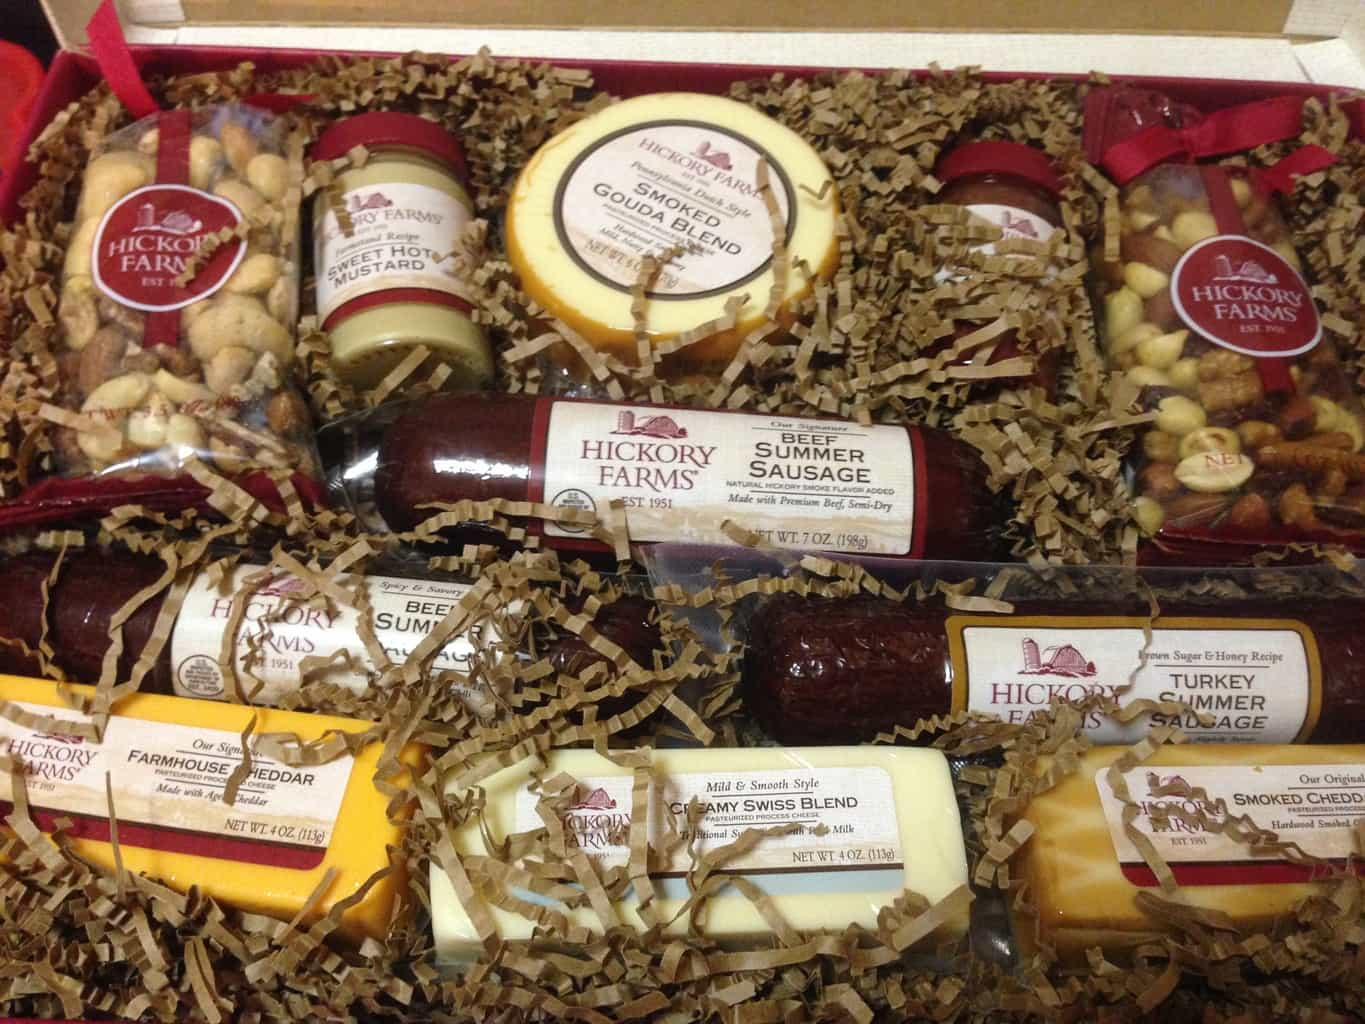 Hickory Farms Turkey Summer Sausage
 Hickory Farms Is A Great Tradition for Holiday Gatherings